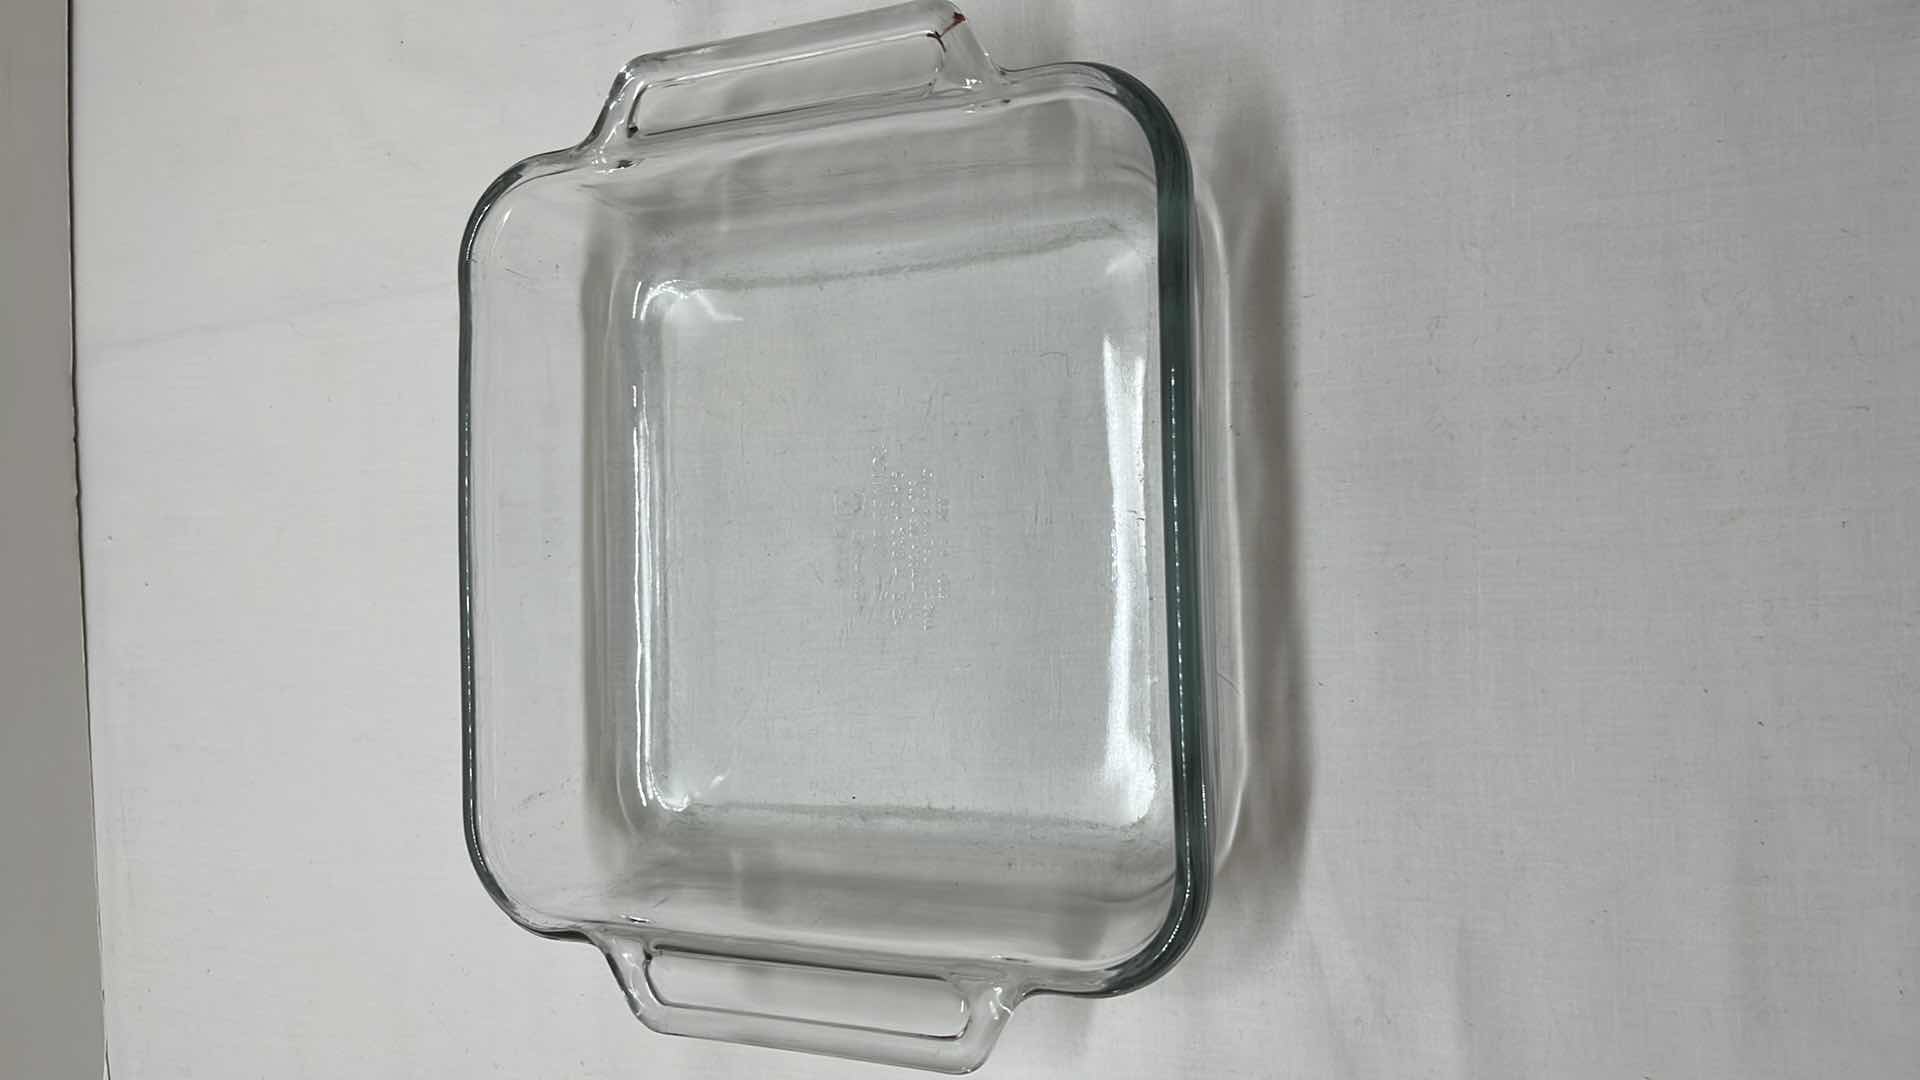 Photo 6 of VINTAGE PYREX GLASS CLEAR CORNING WARE/OVAL ROASTER W LID & ANCHOR OVENWARE GLASS 2 QT SQUARE BAKING DISH